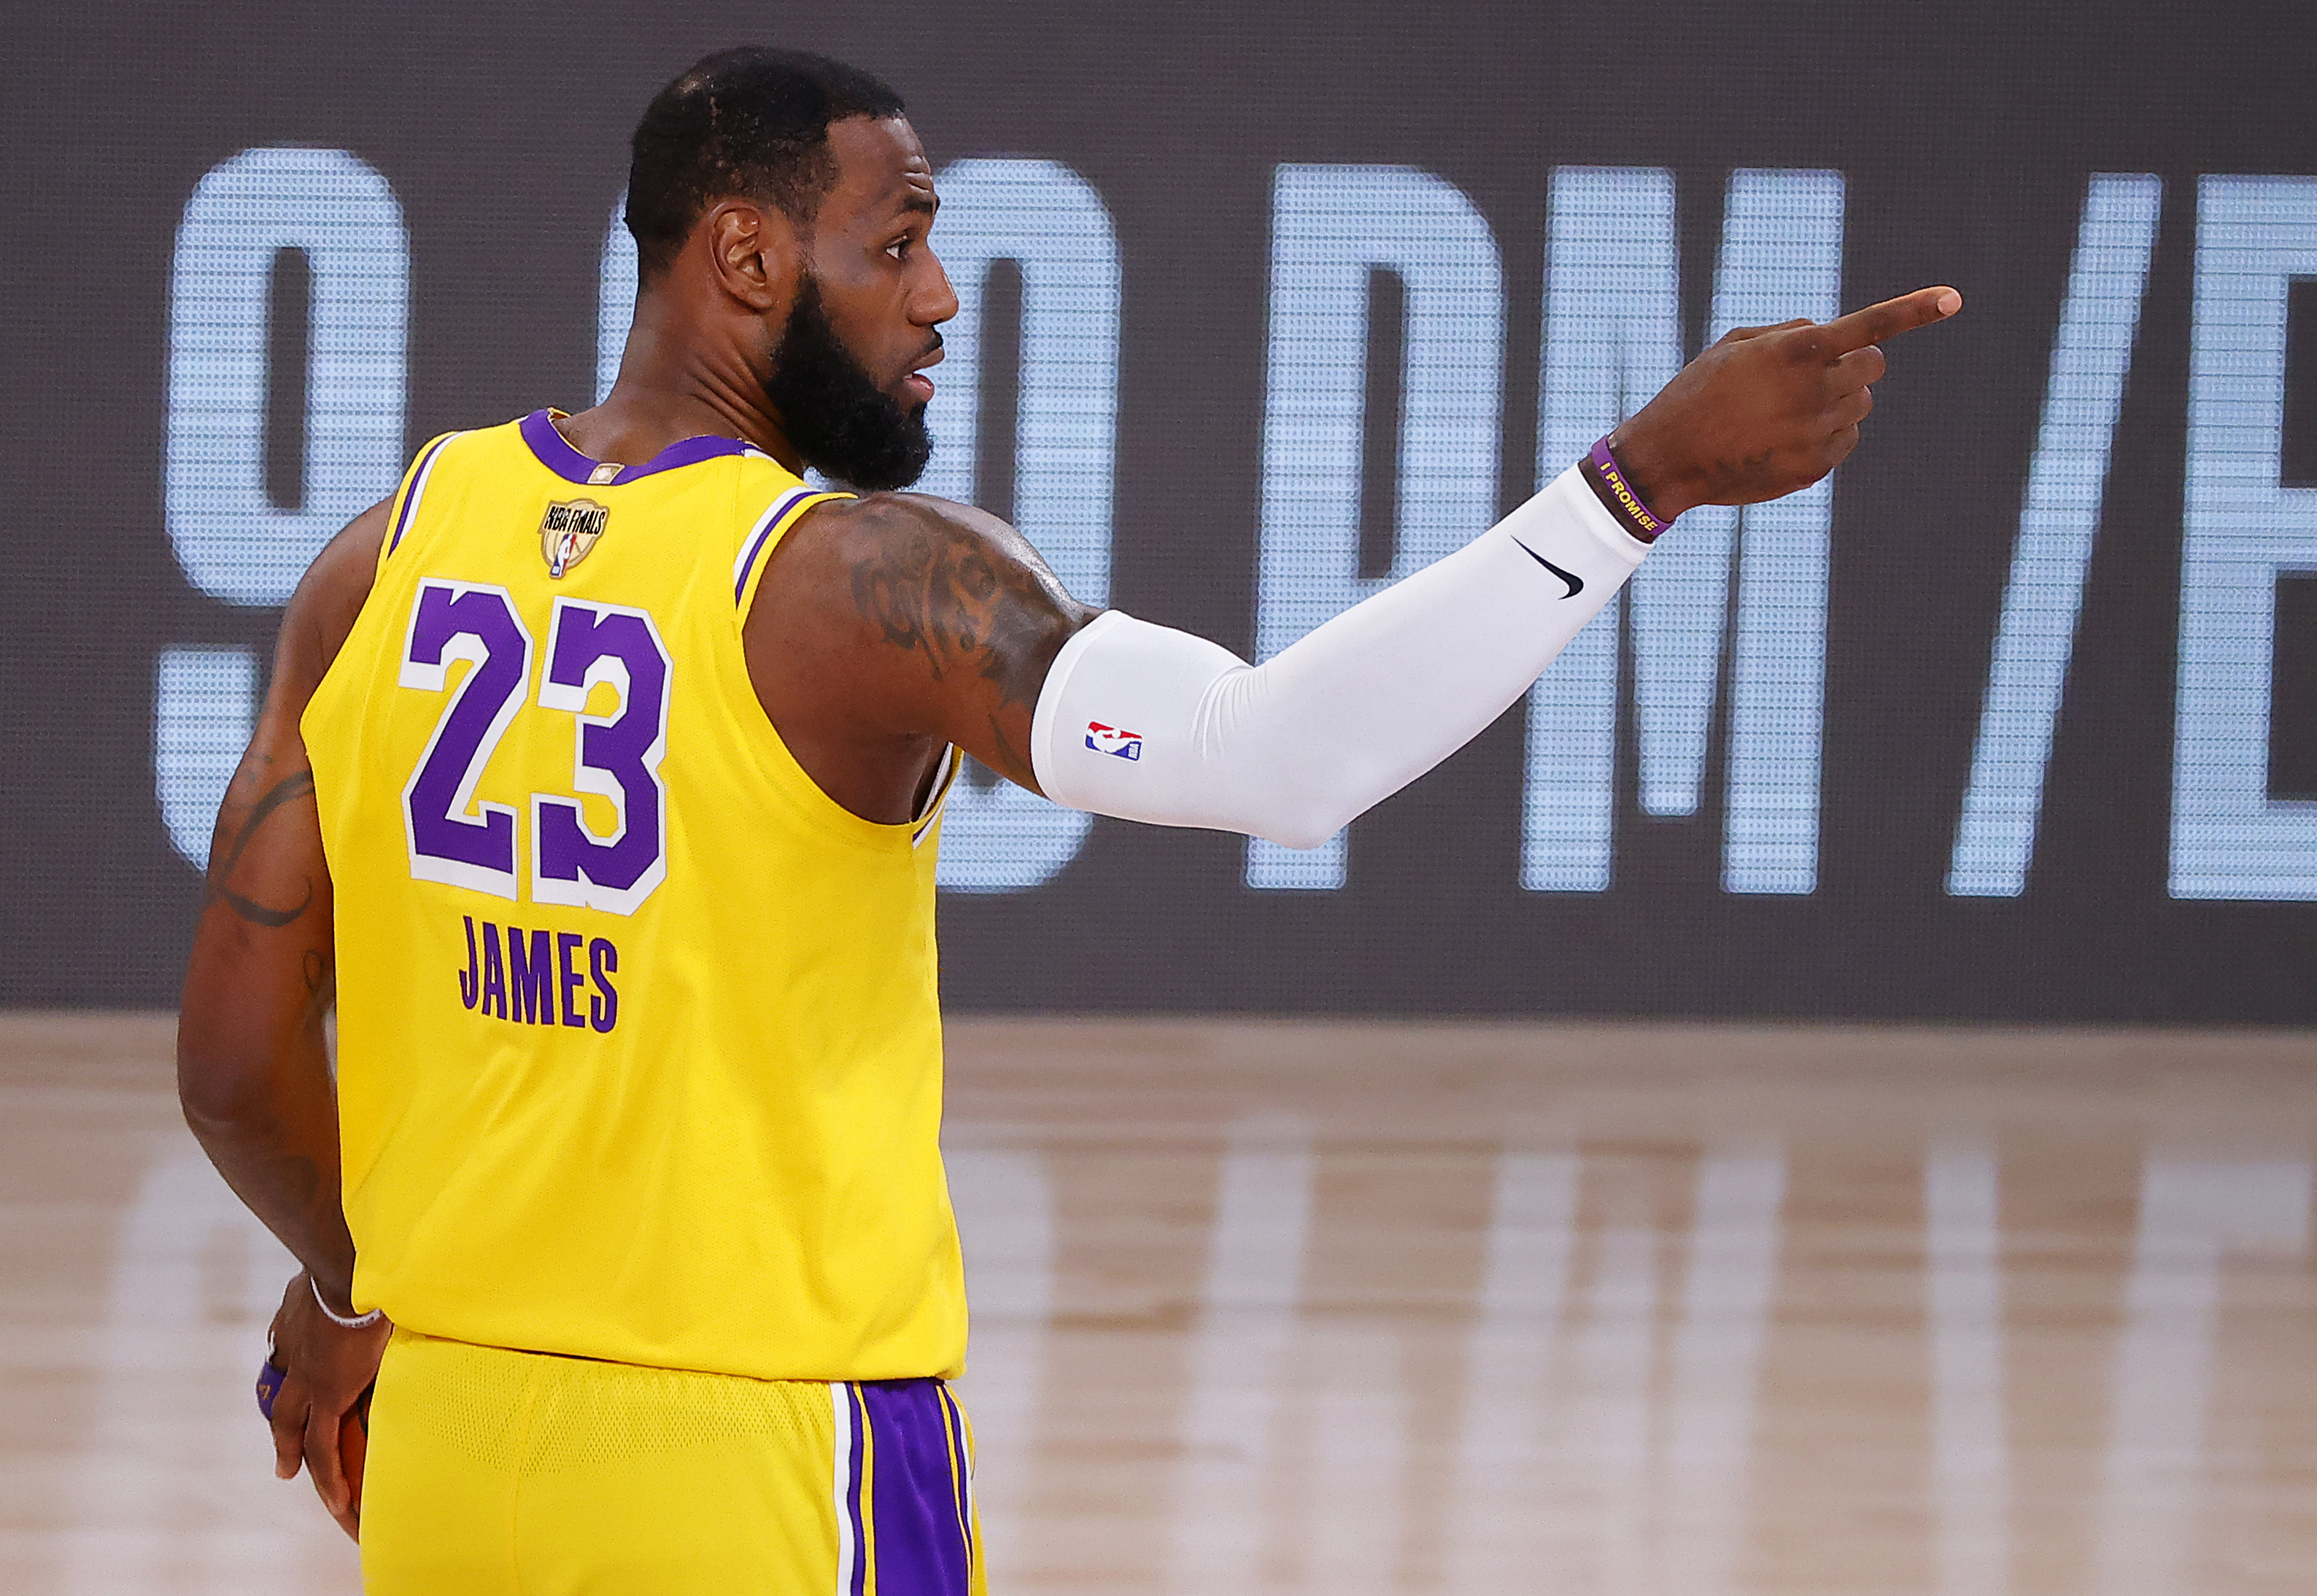 Unbeaten in Mamba jerseys, Lakers try to finish Heat in Game 5